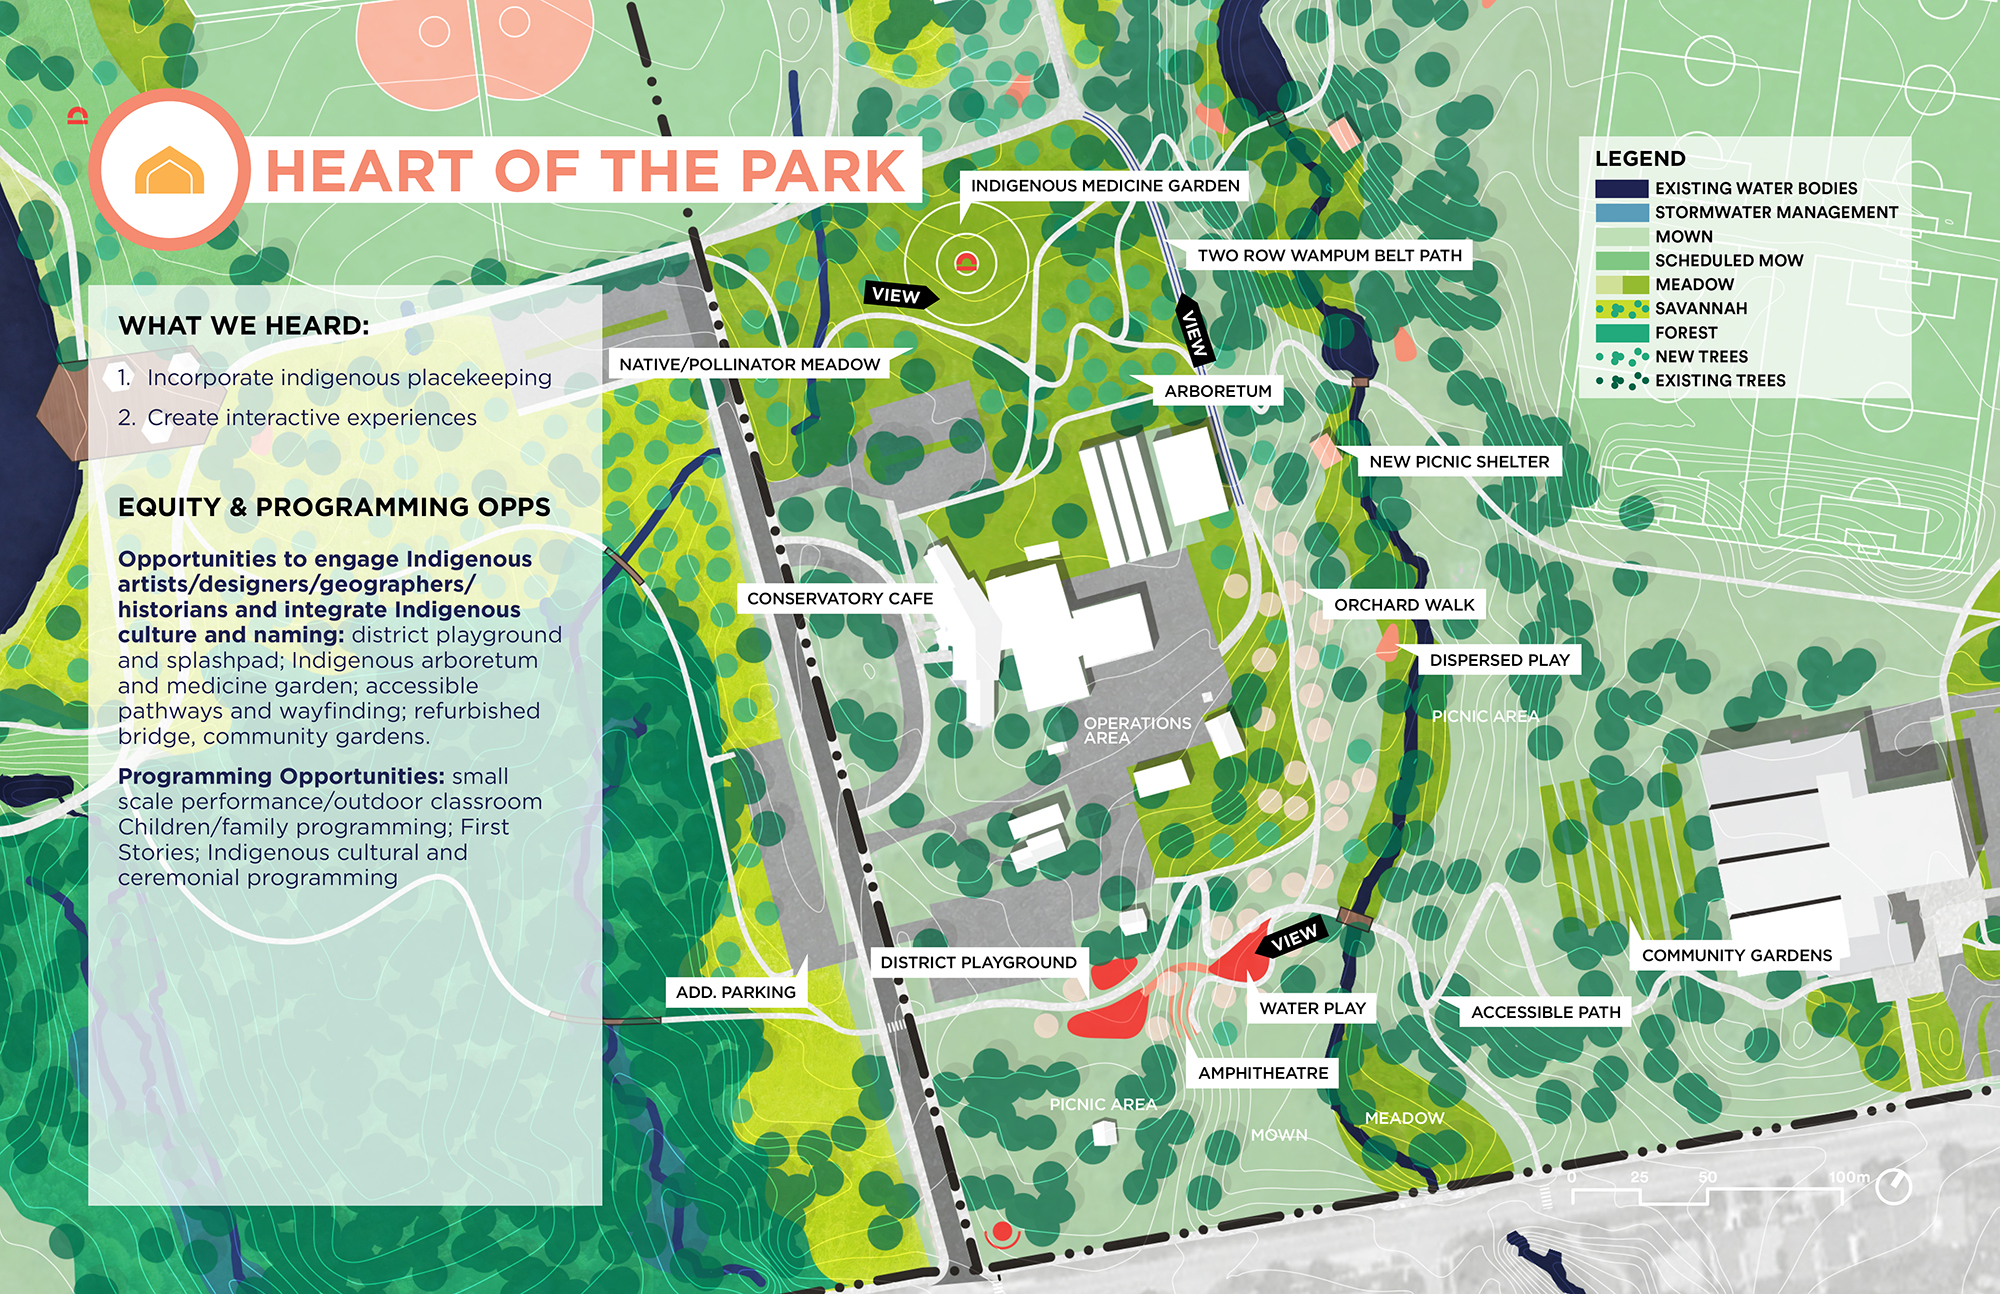 This plan image demonstrates what the design for the heart of the park area could look like. Features include an accessible district playground and splashpad with and amphitheatre south of the conservatory. North of the conservatory is an Indigenous medicine garden, meadow and arboretum. Connecting the Two-Row Wampum Belt path with flowering fruit trees along it. Also included on the other side of Renforth creek is a location for community gardens.